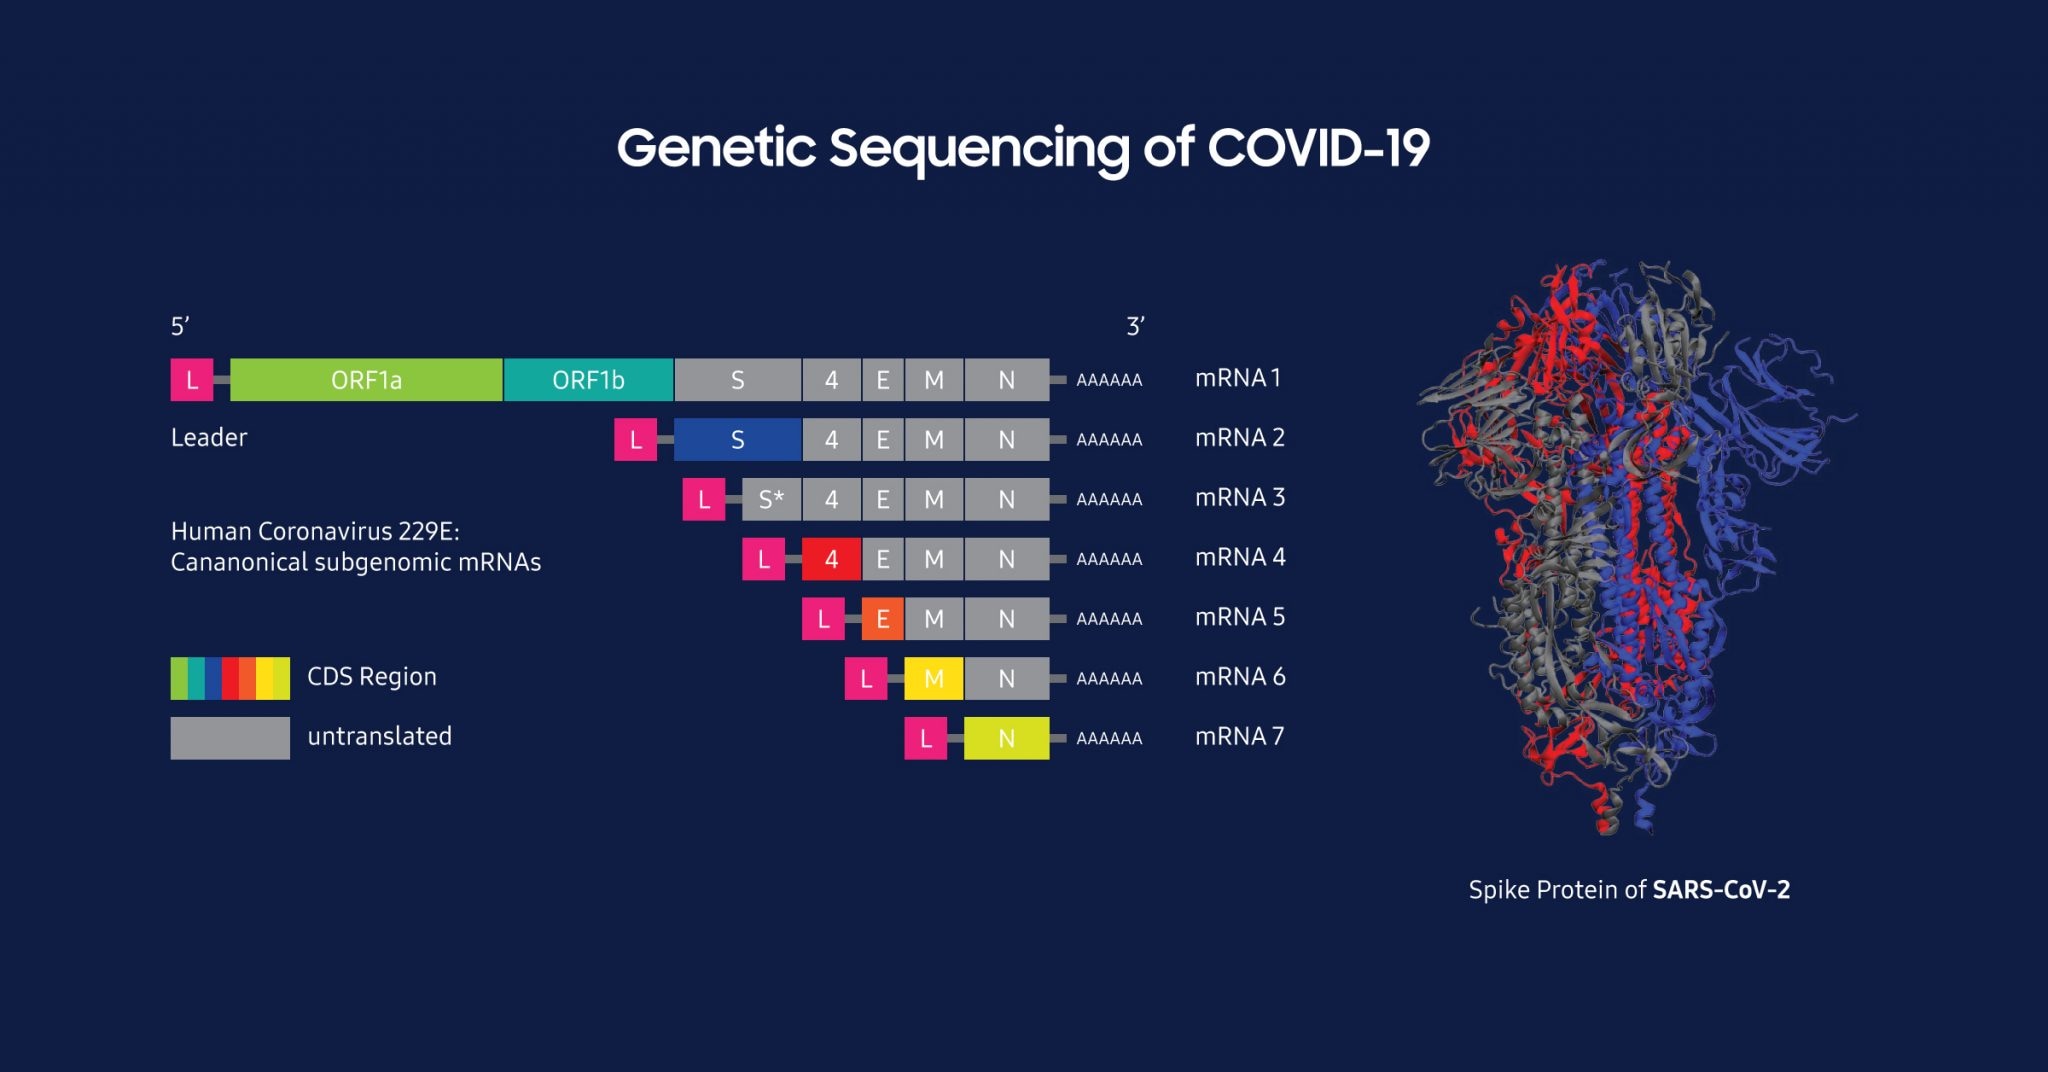 covid-19 genetic sequencing supercomputing